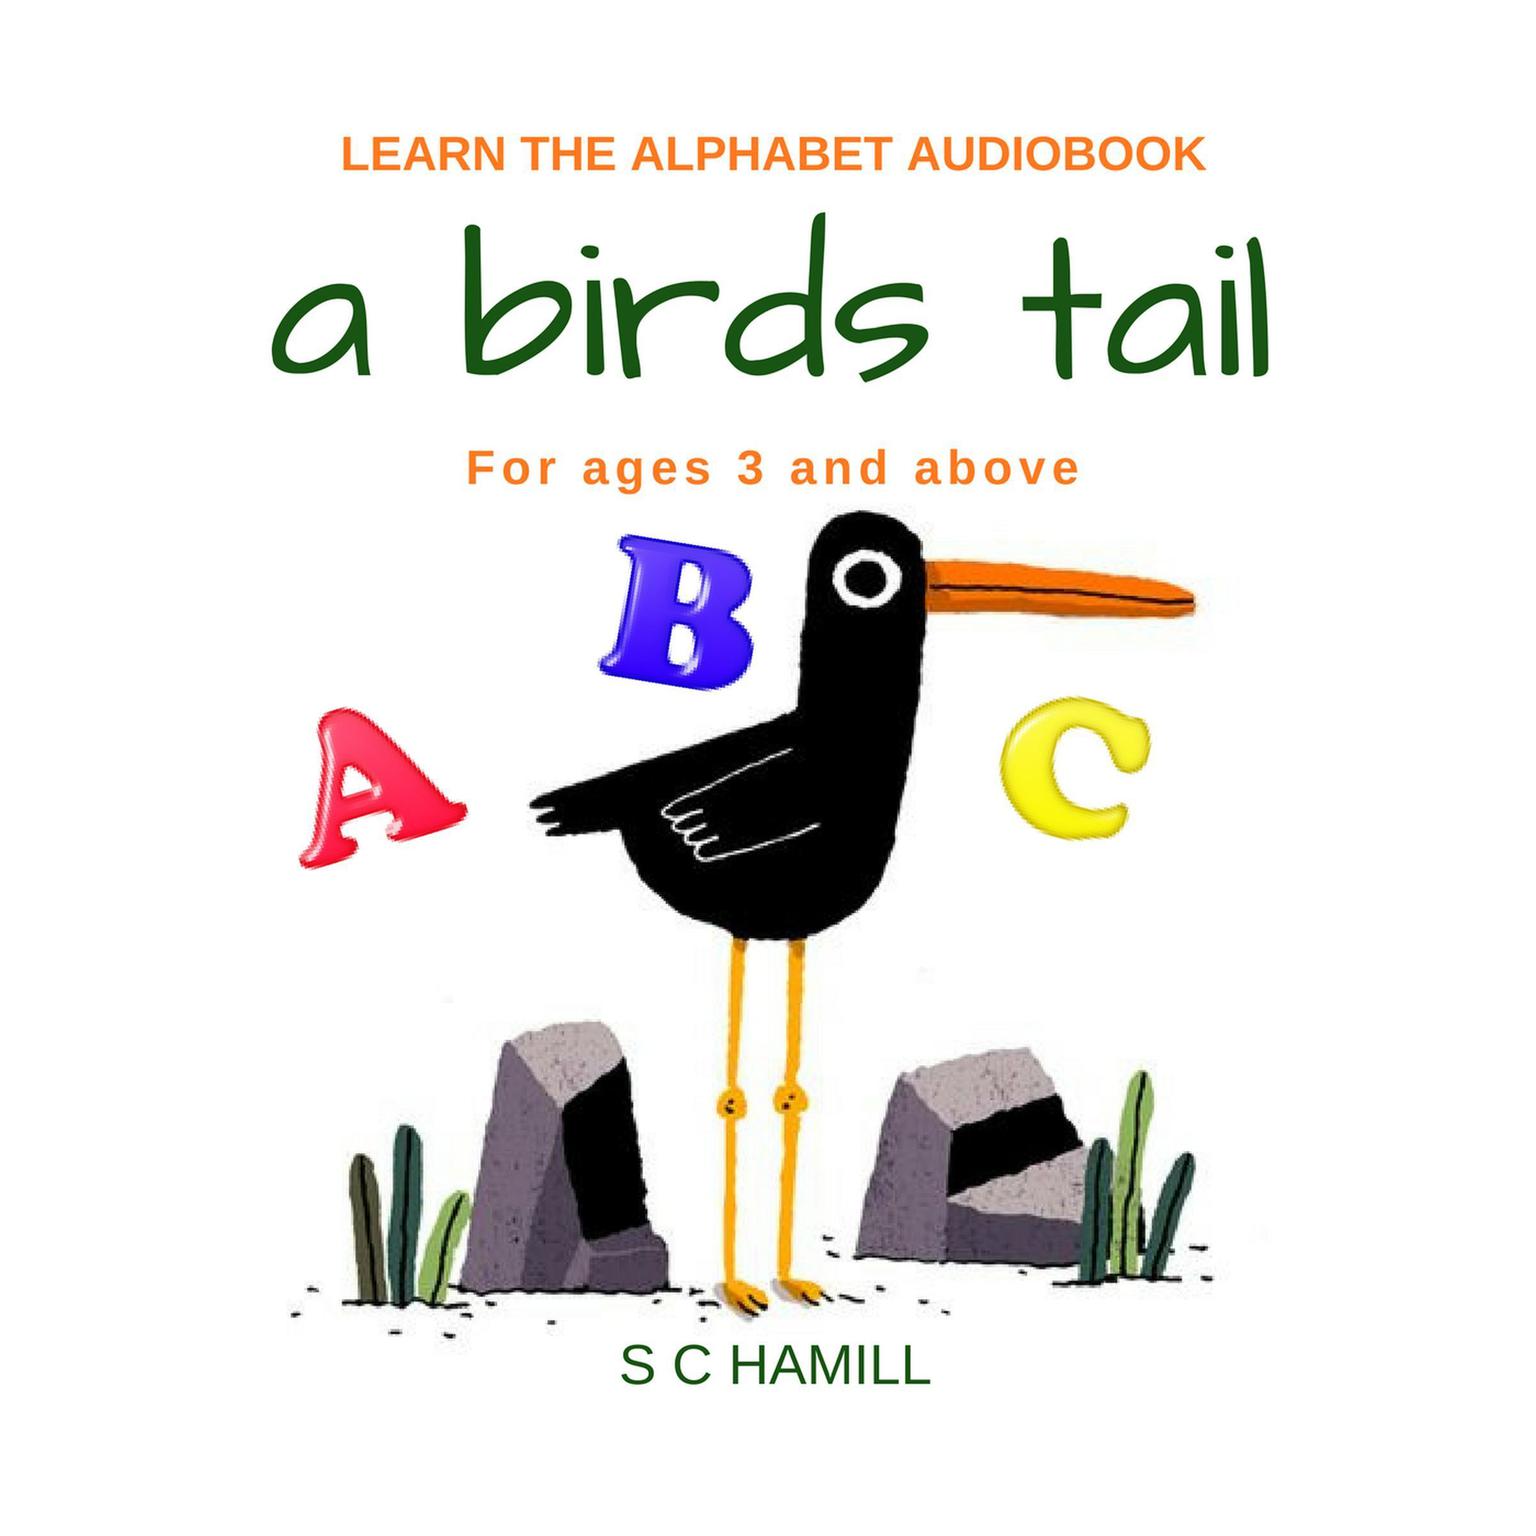 A Birds Tail... Childrens Learn the Alphabet Audiobook for ages 3 and above. Audiobook, by S. C. Hamill